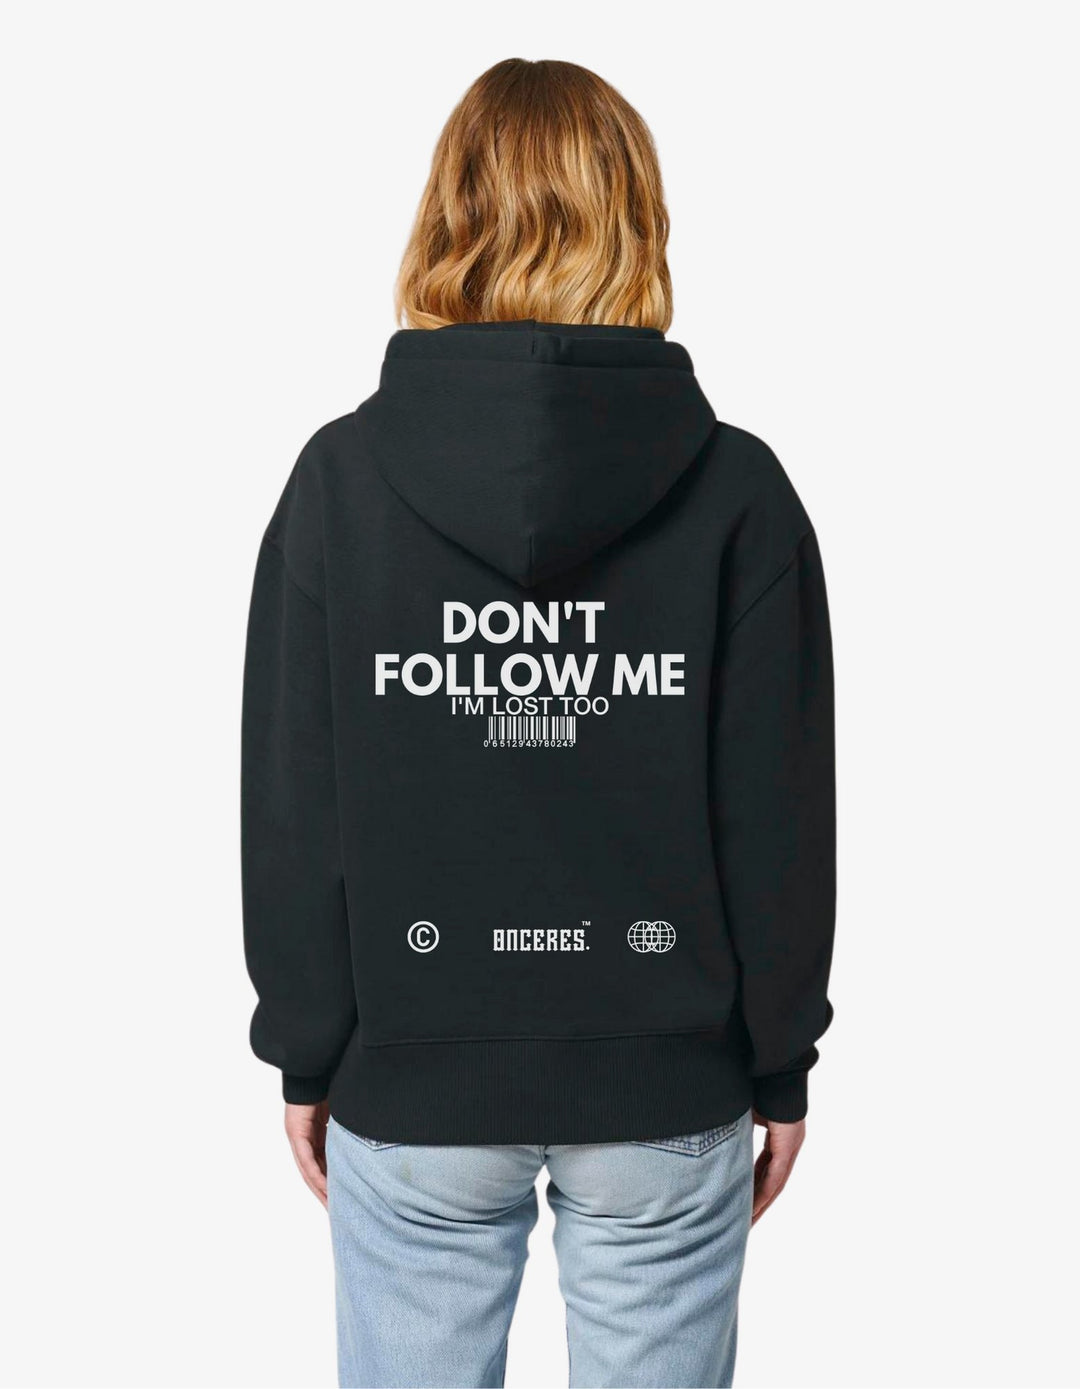 Don't follow me - Onceres™